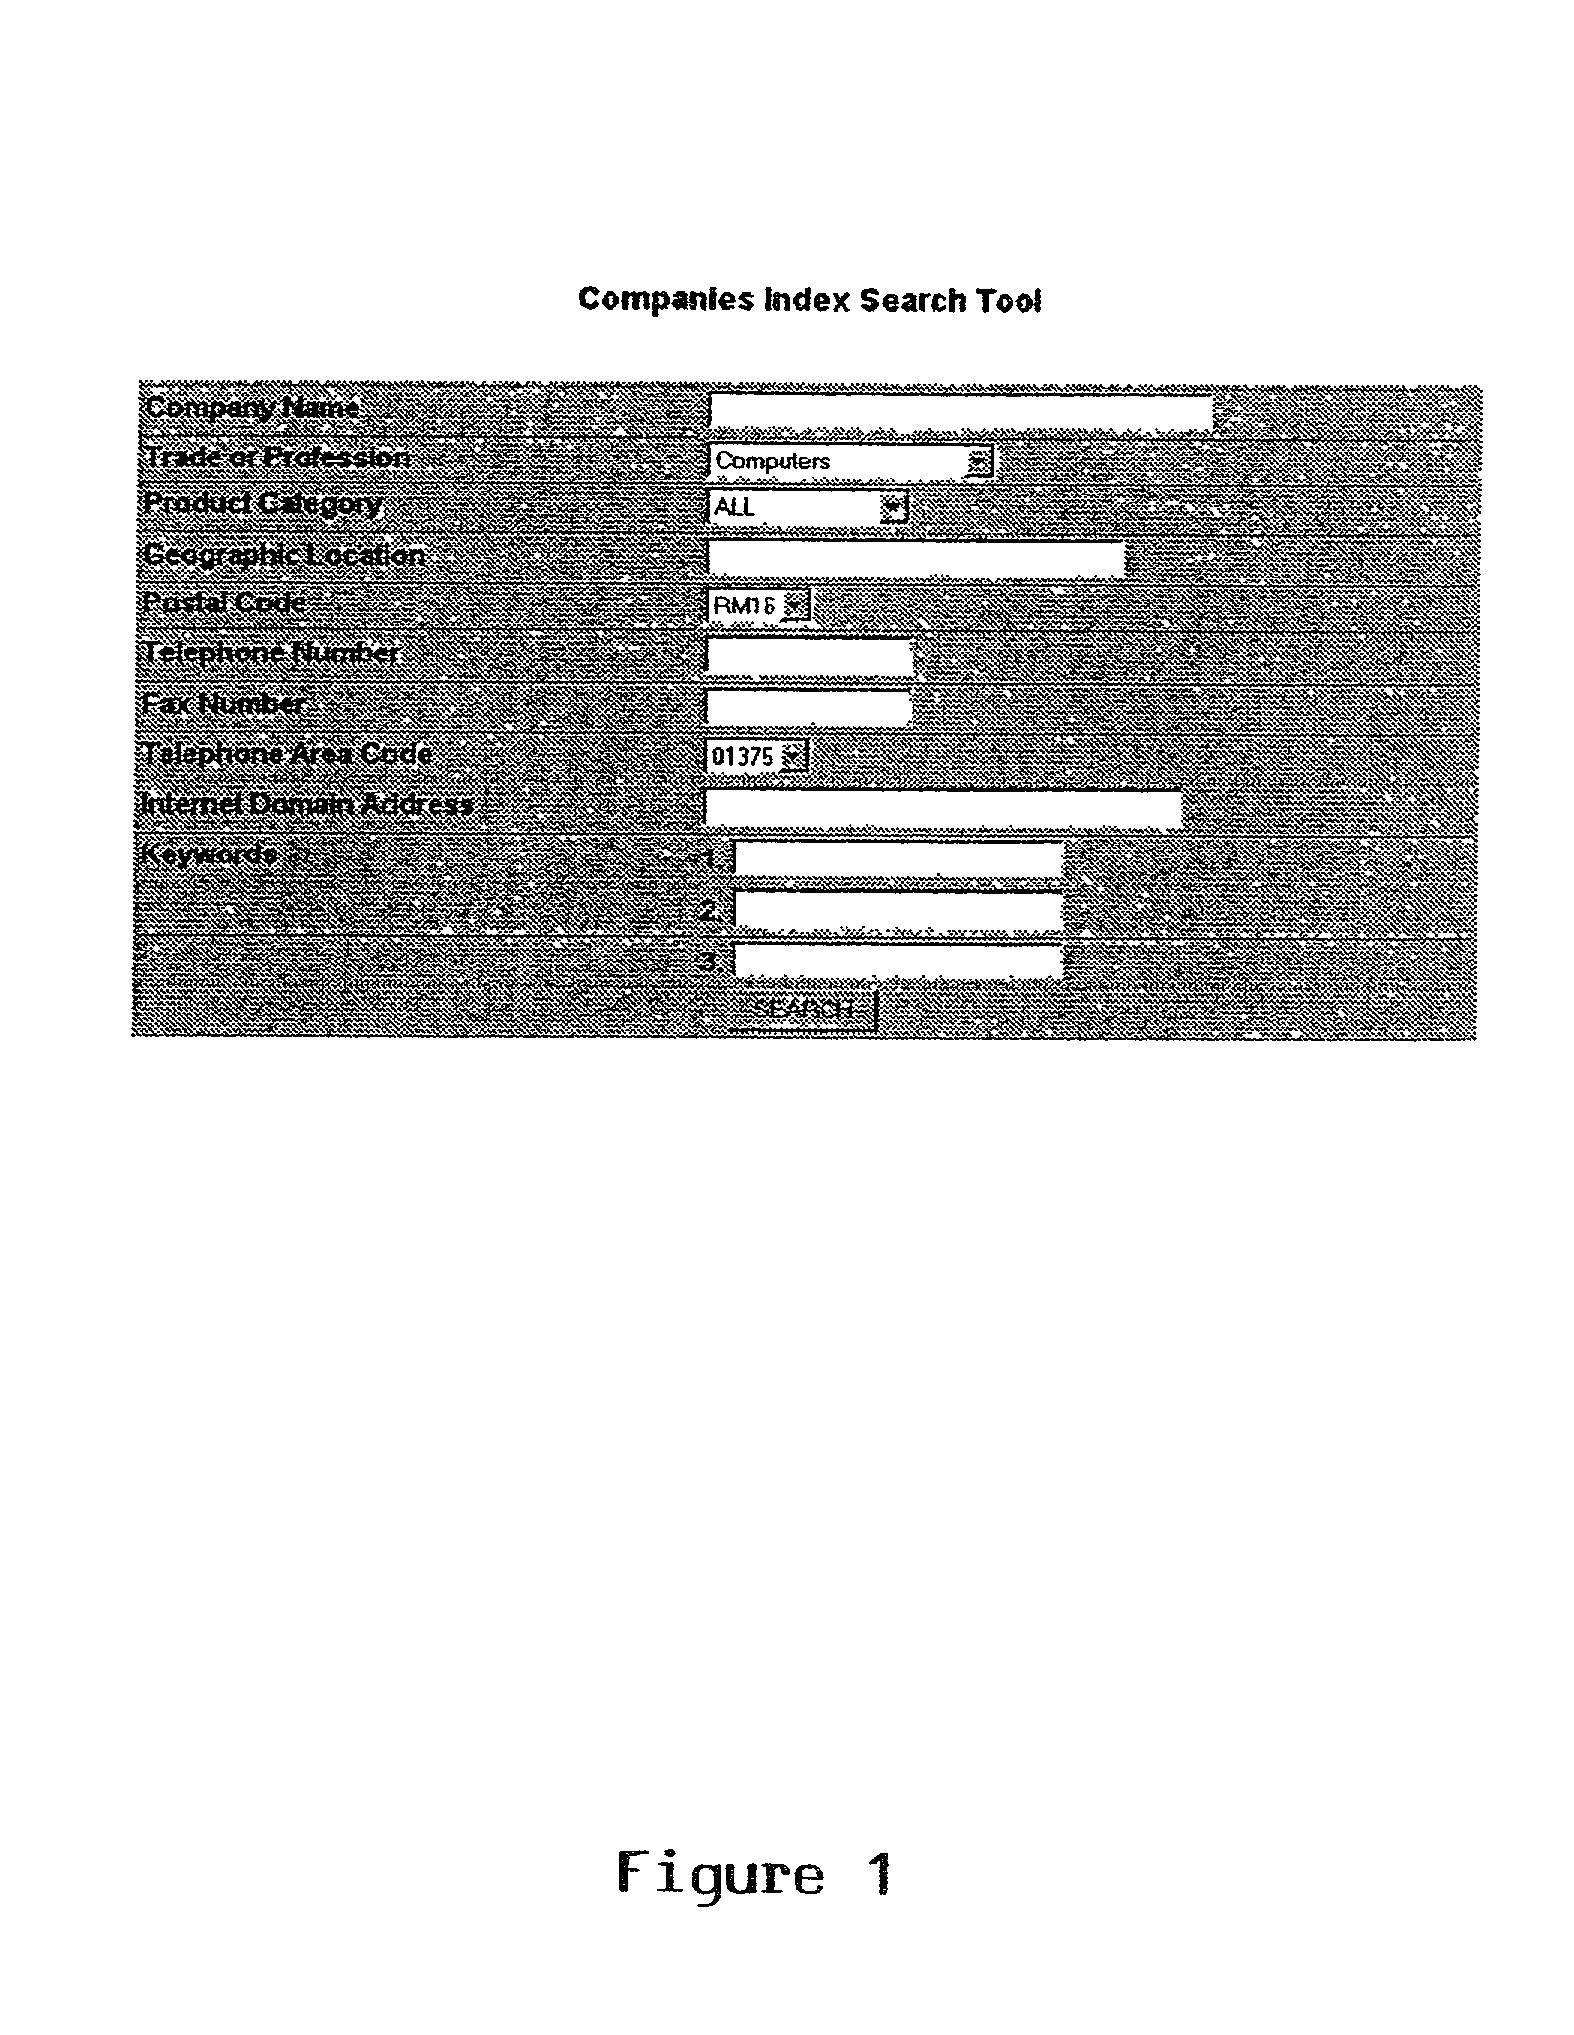 Indexation system for electronic addresses